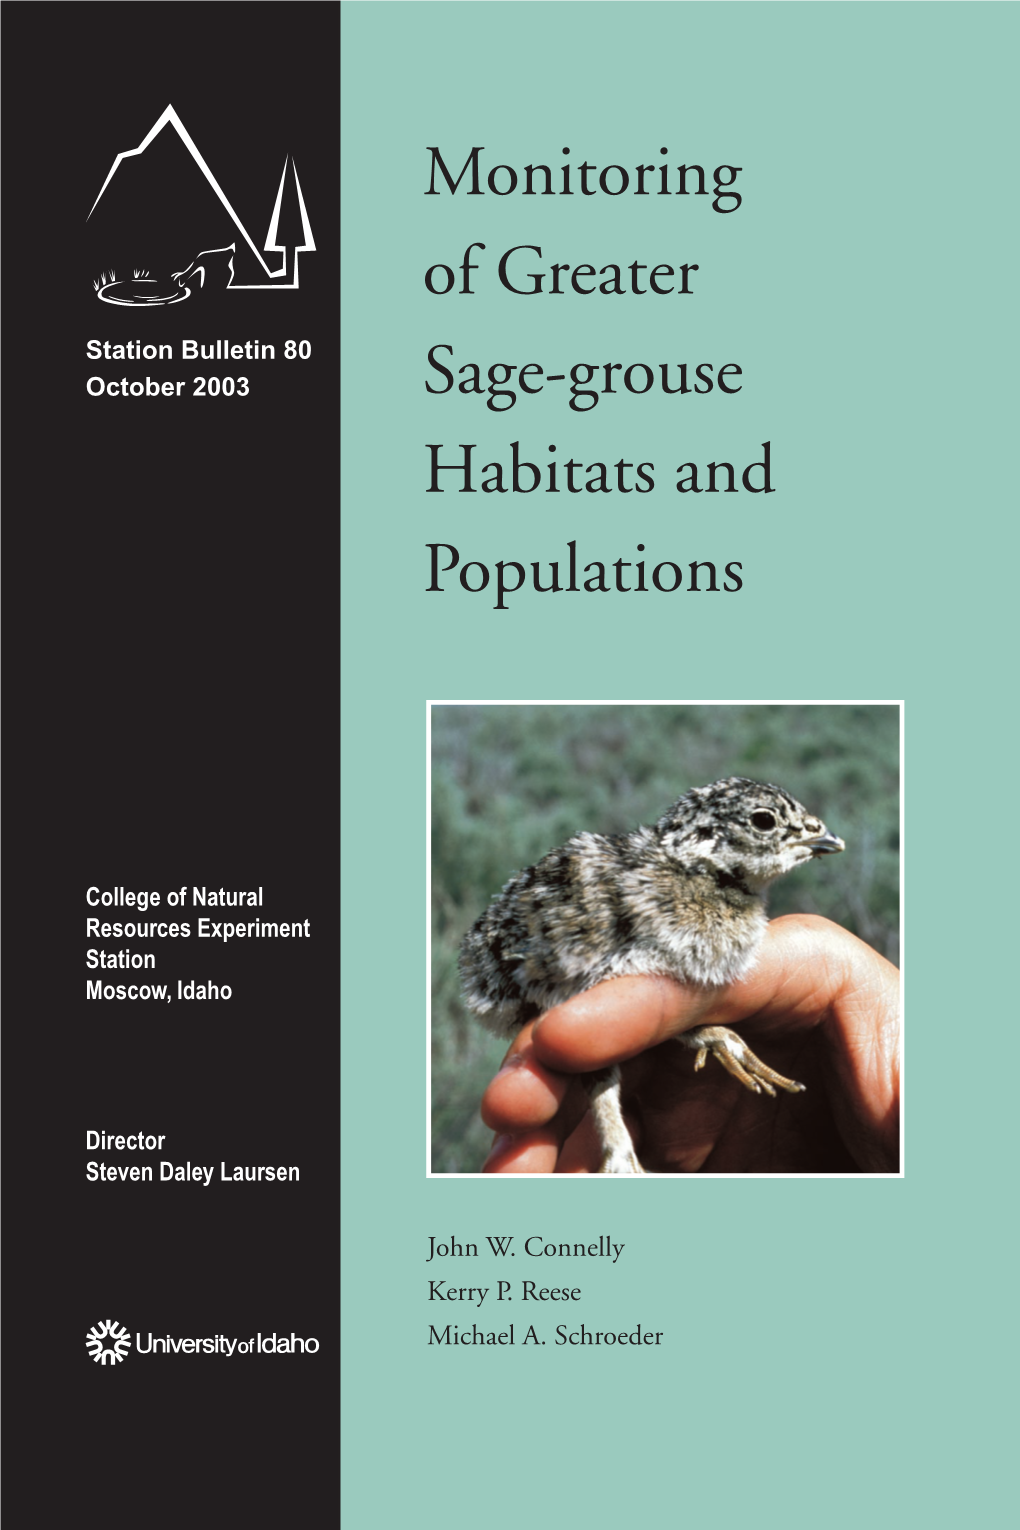 Monitoring of Greater Sage-Grouse Habitats and Populations